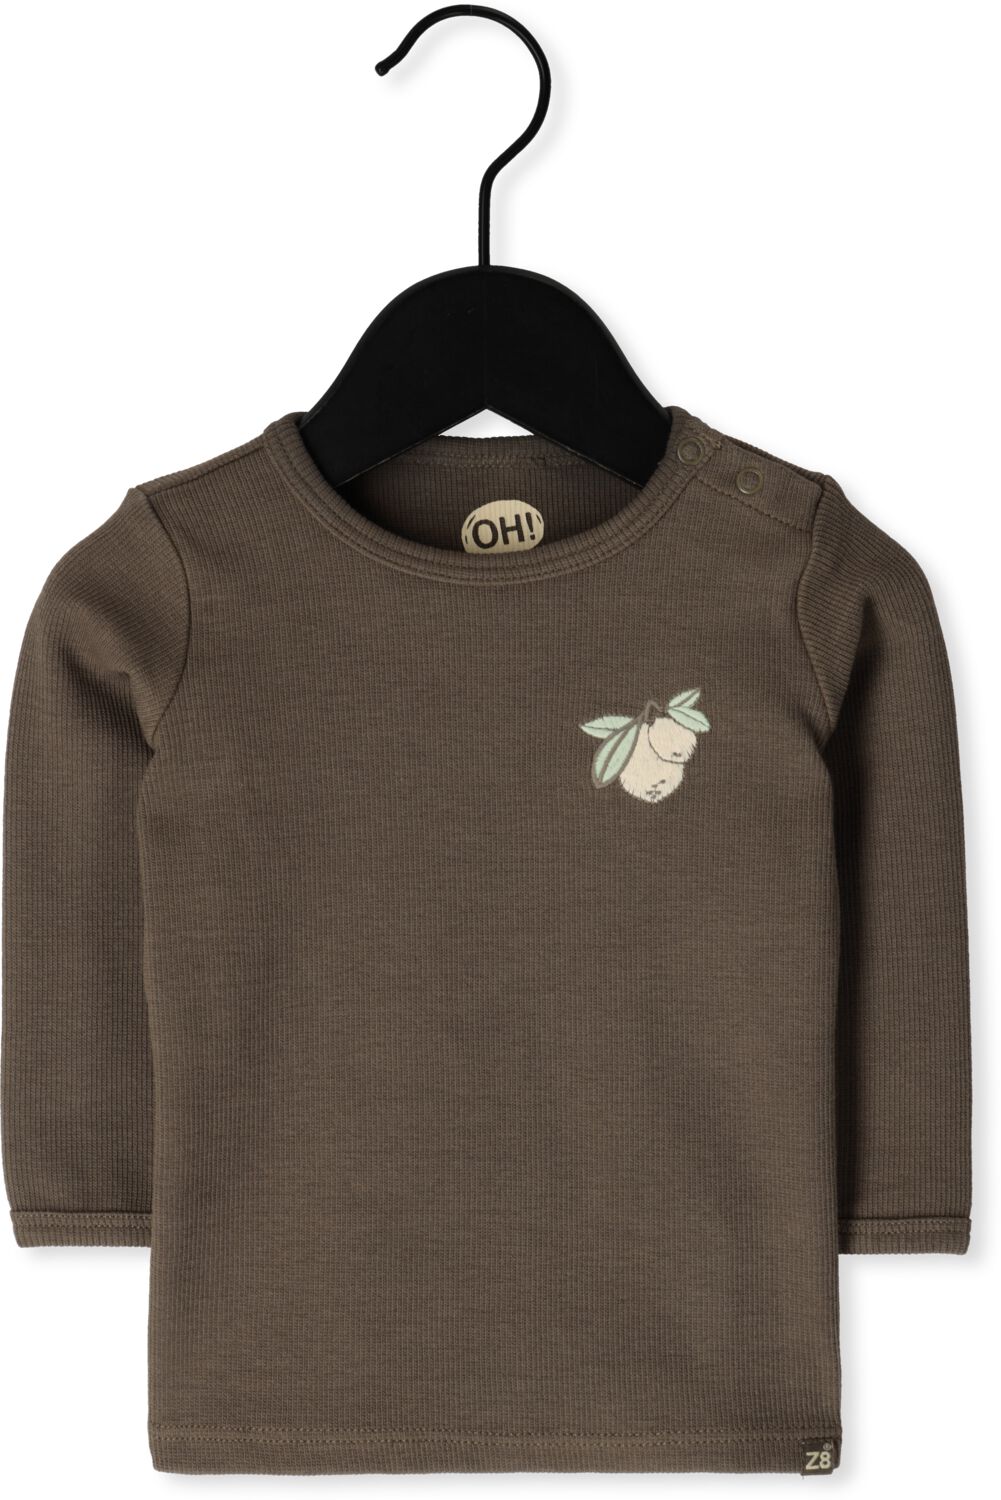 Z8 Baby Tops & T-shirts Julio Taupe